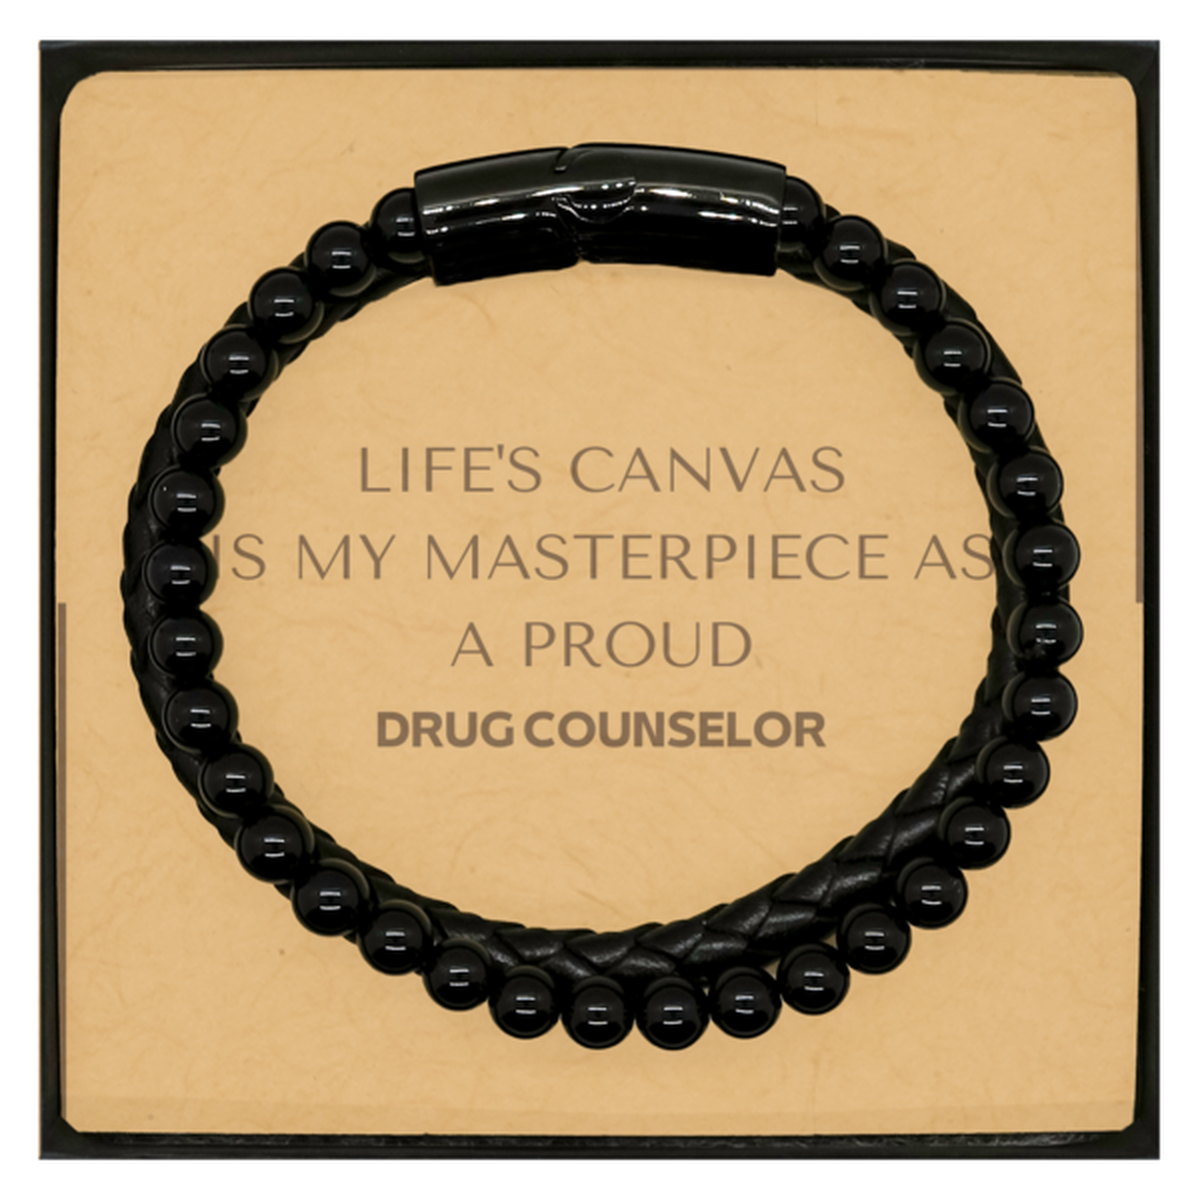 Proud Drug Counselor Gifts, Life's canvas is my masterpiece, Epic Birthday Christmas Unique Stone Leather Bracelets For Drug Counselor, Coworkers, Men, Women, Friends